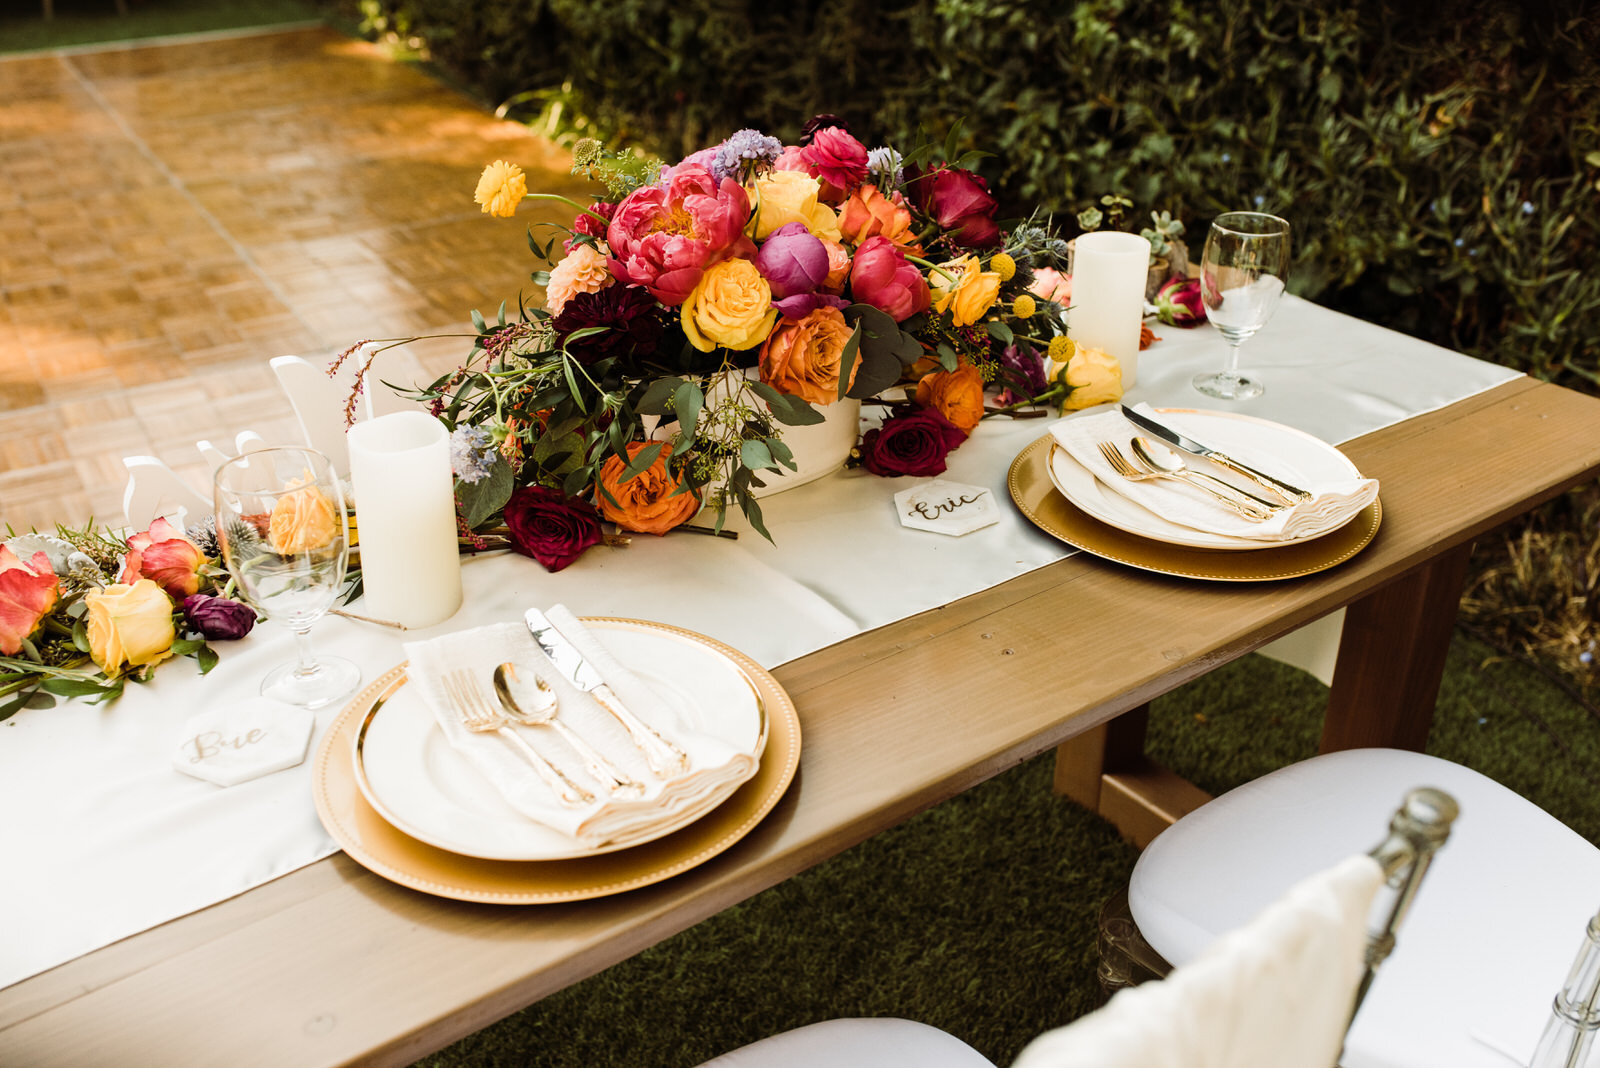 Sweetheart Table with Bright Florals and Gold Place Settings on Handmade Wooden Table | Houdini Estate Wedding | photo by Kept Record | www.keptrecord.com